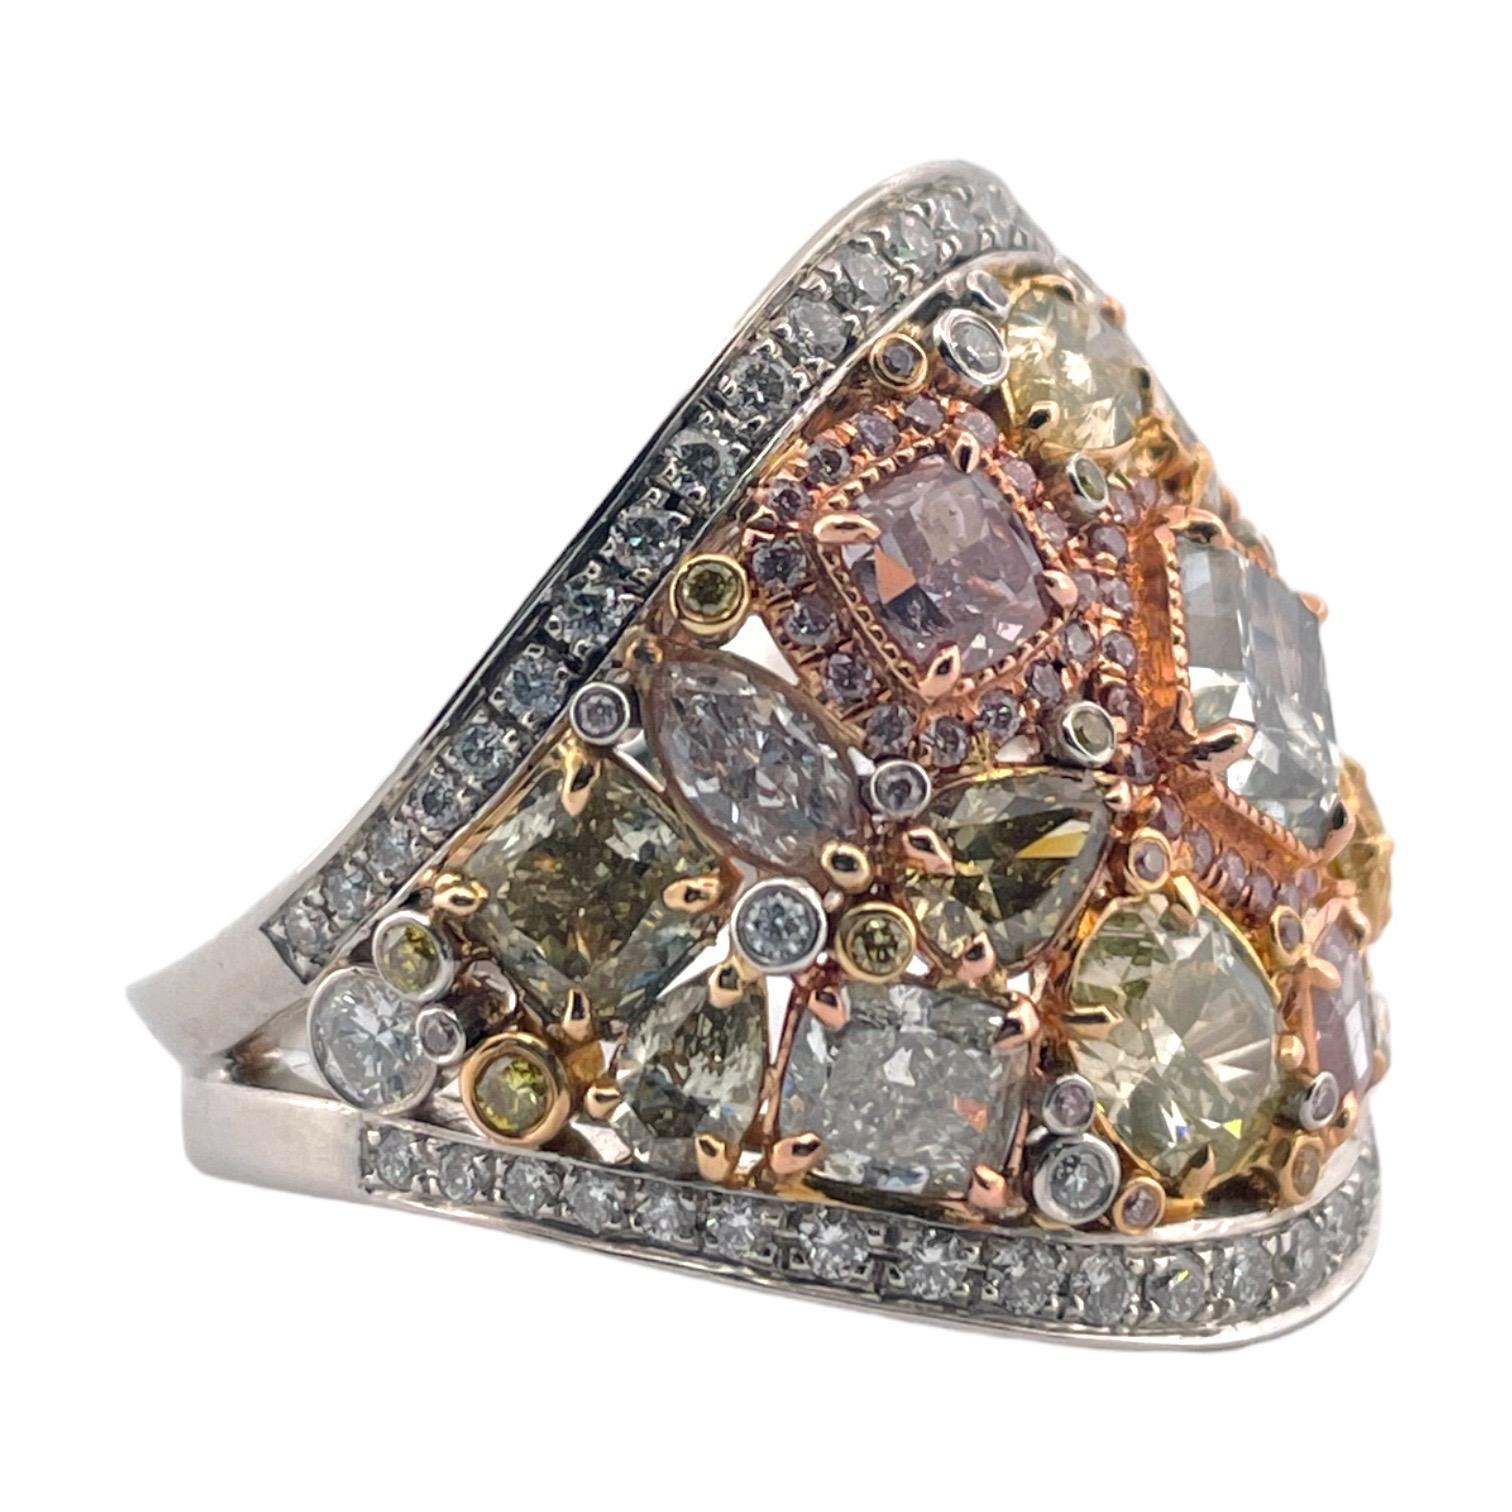 This exquisite ring is a masterful array of multi-colored diamonds, meticulously set in 14K white gold. Central to its design is a 1.17 CT light yellow-green VS1 diamond, encircled by an array of 0.53 CT oval fancy yellow, 0.40 CT cushion pink